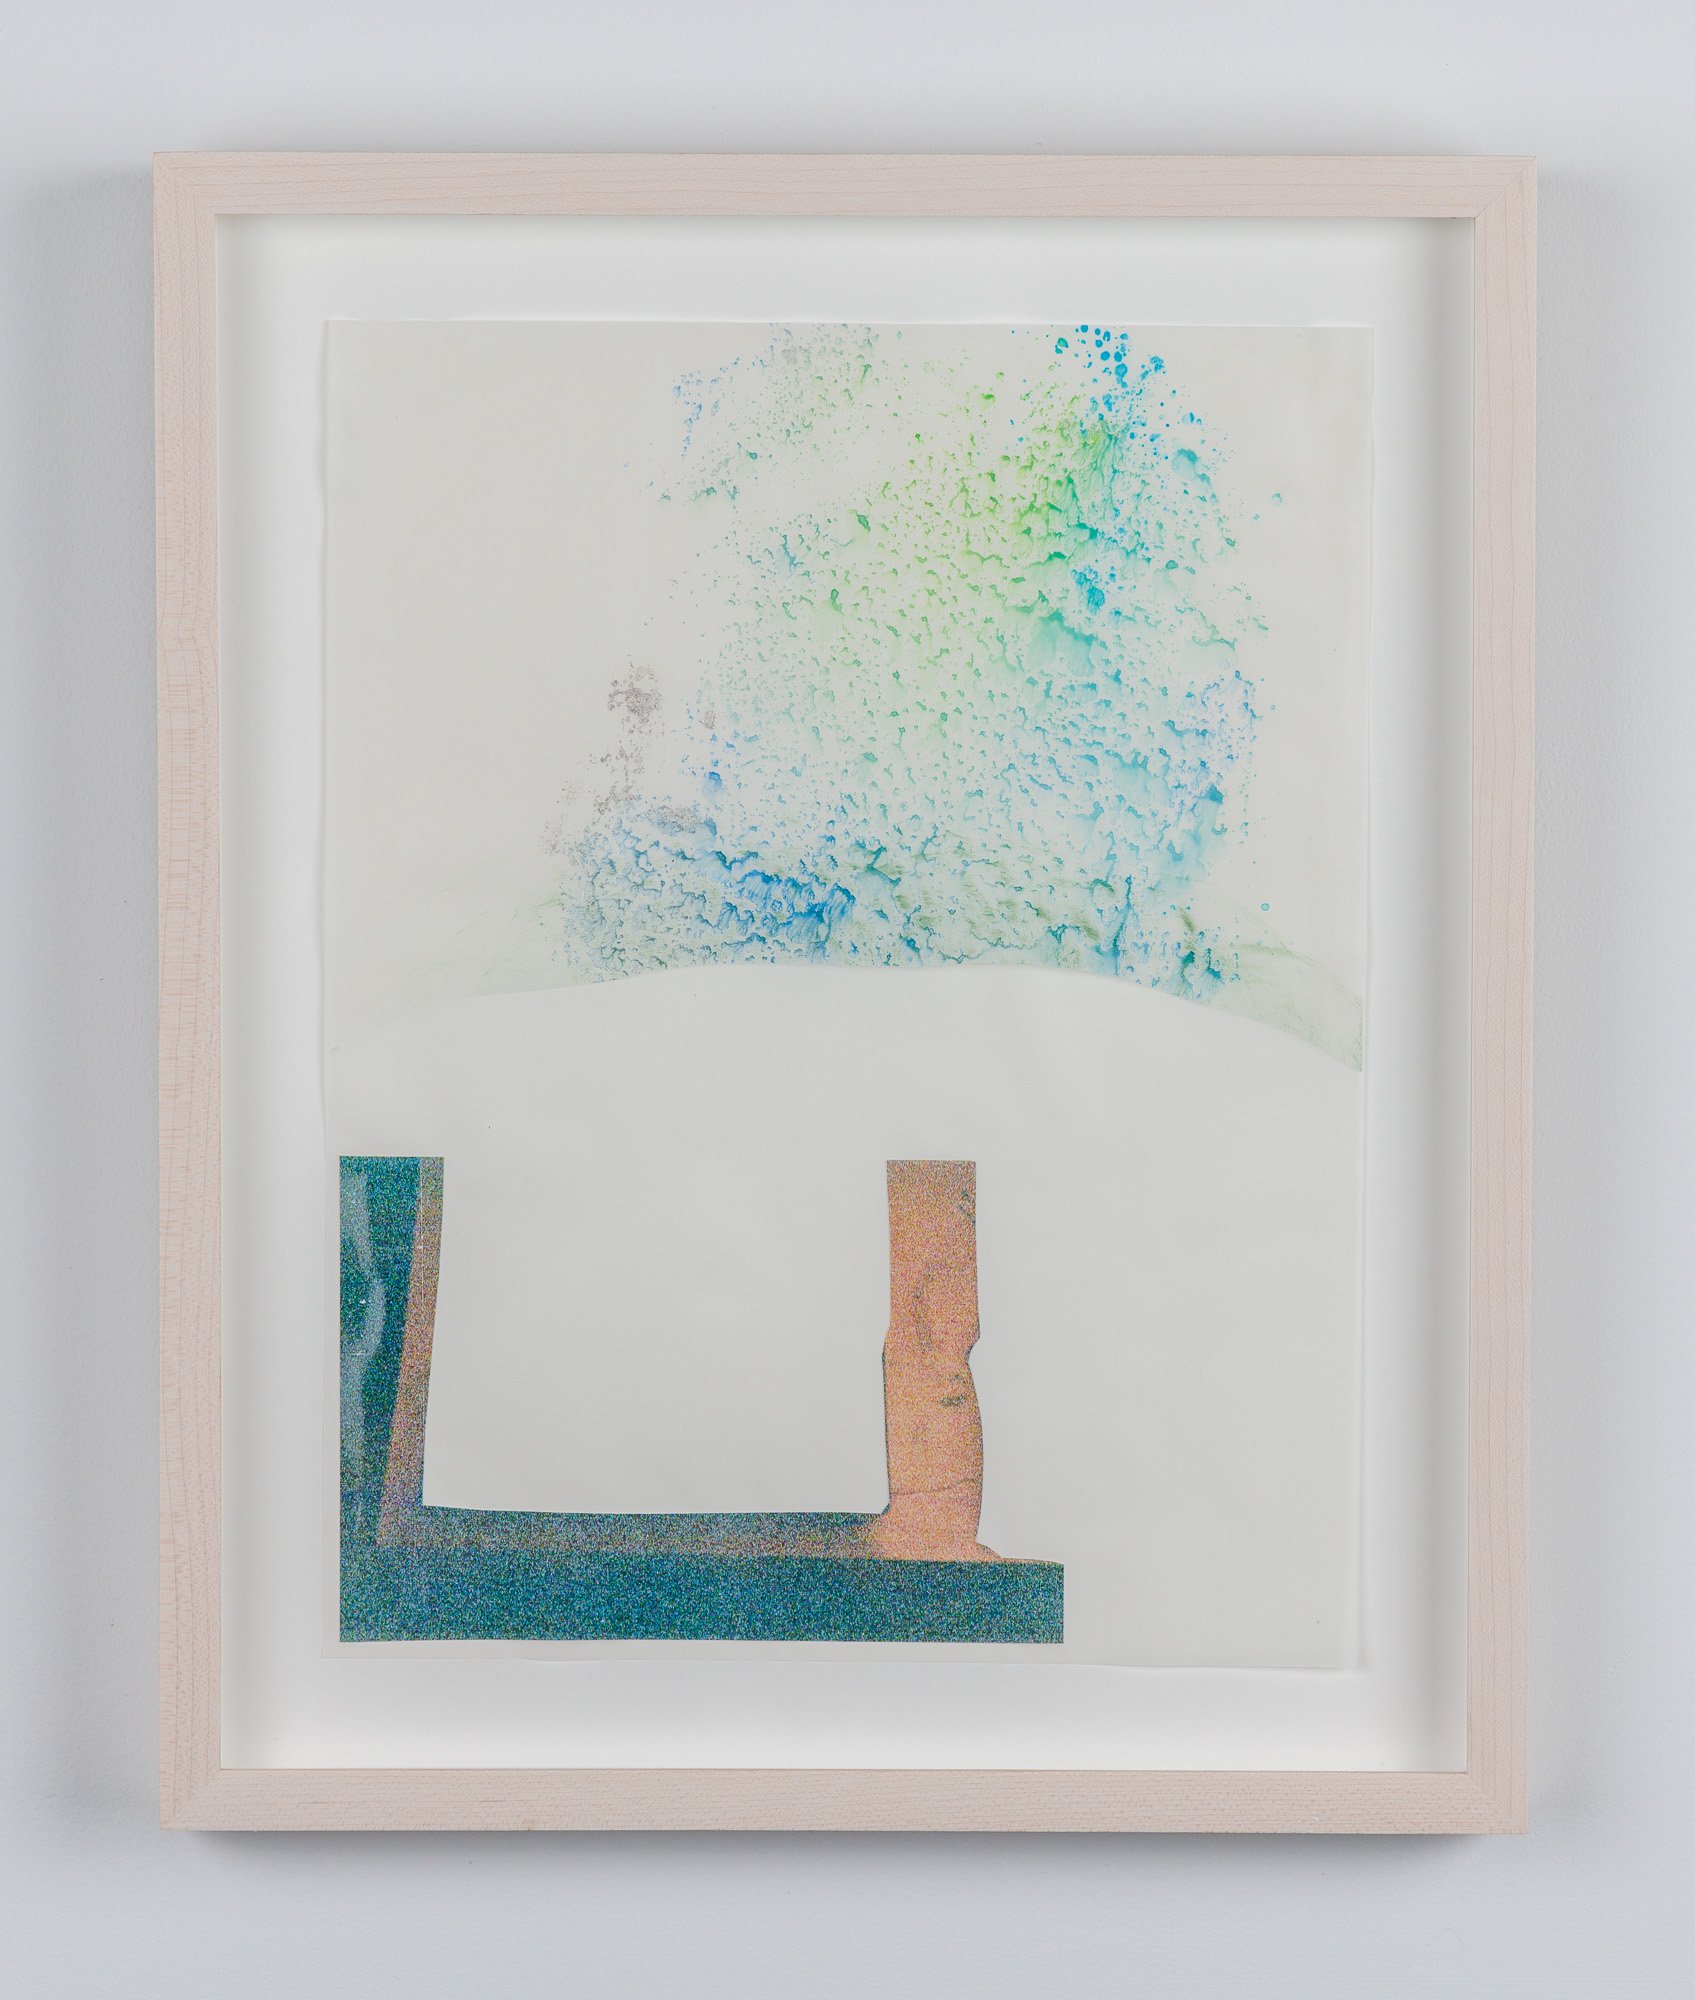  Laura Hunt,  Untitled (light spray) , 2019, photo collage and watercolor on vellum, framed, 13.75 x 11.25 inches. 